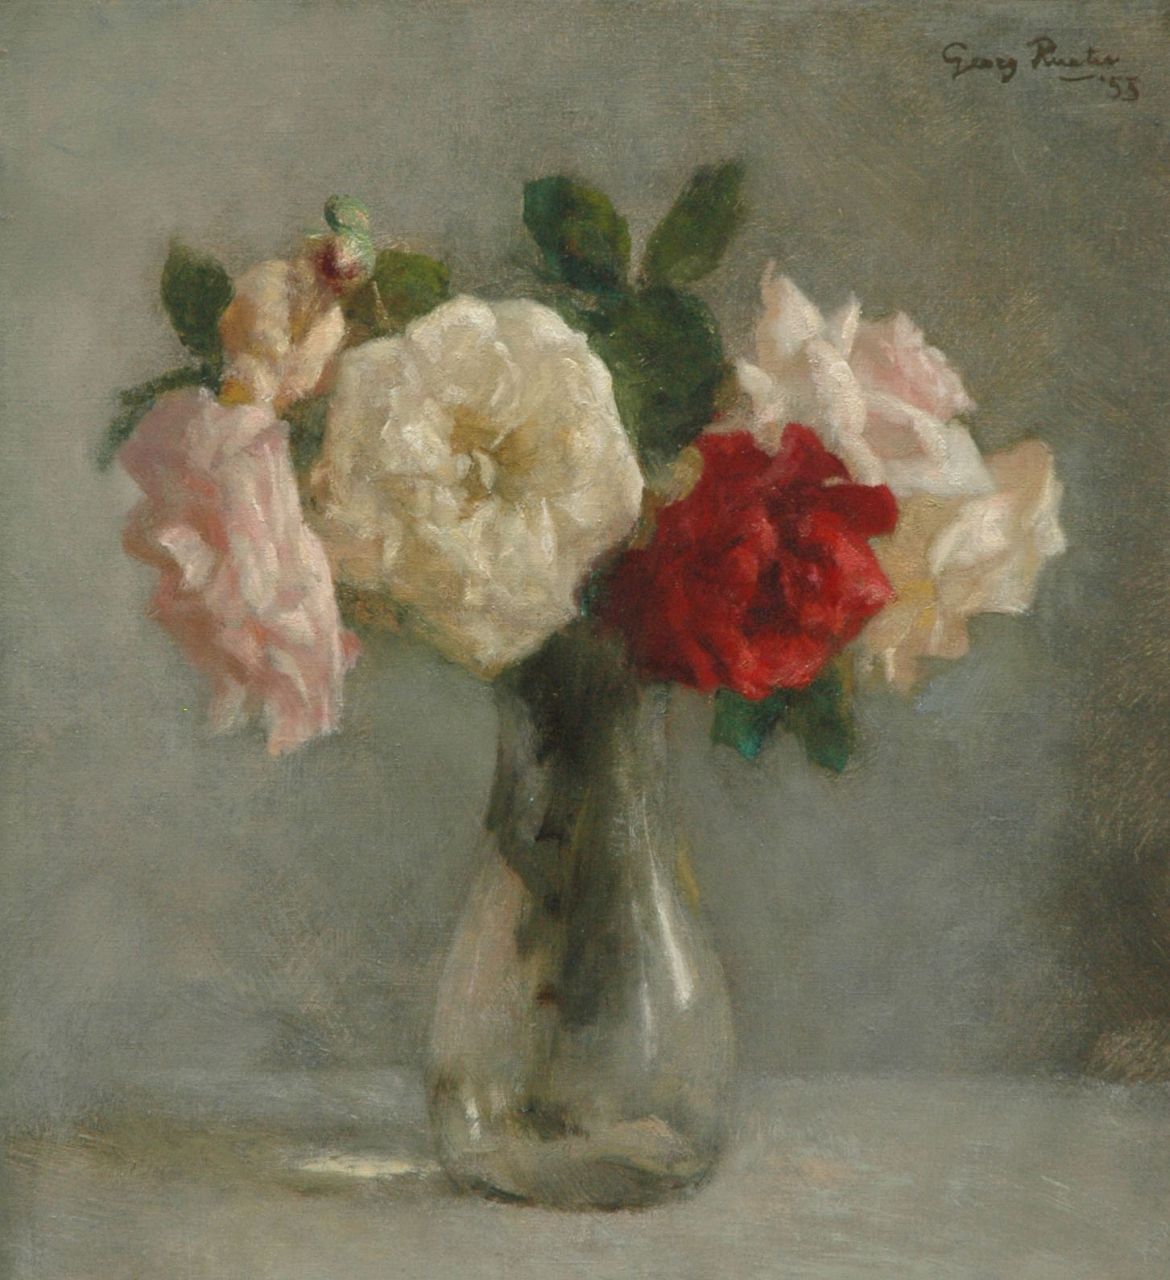 Rueter W.C.G.  | Wilhelm Christian 'Georg' Rueter, Roses in vase of glass, oil on canvas 46.0 x 42.0 cm, signed u.r. and dated '53